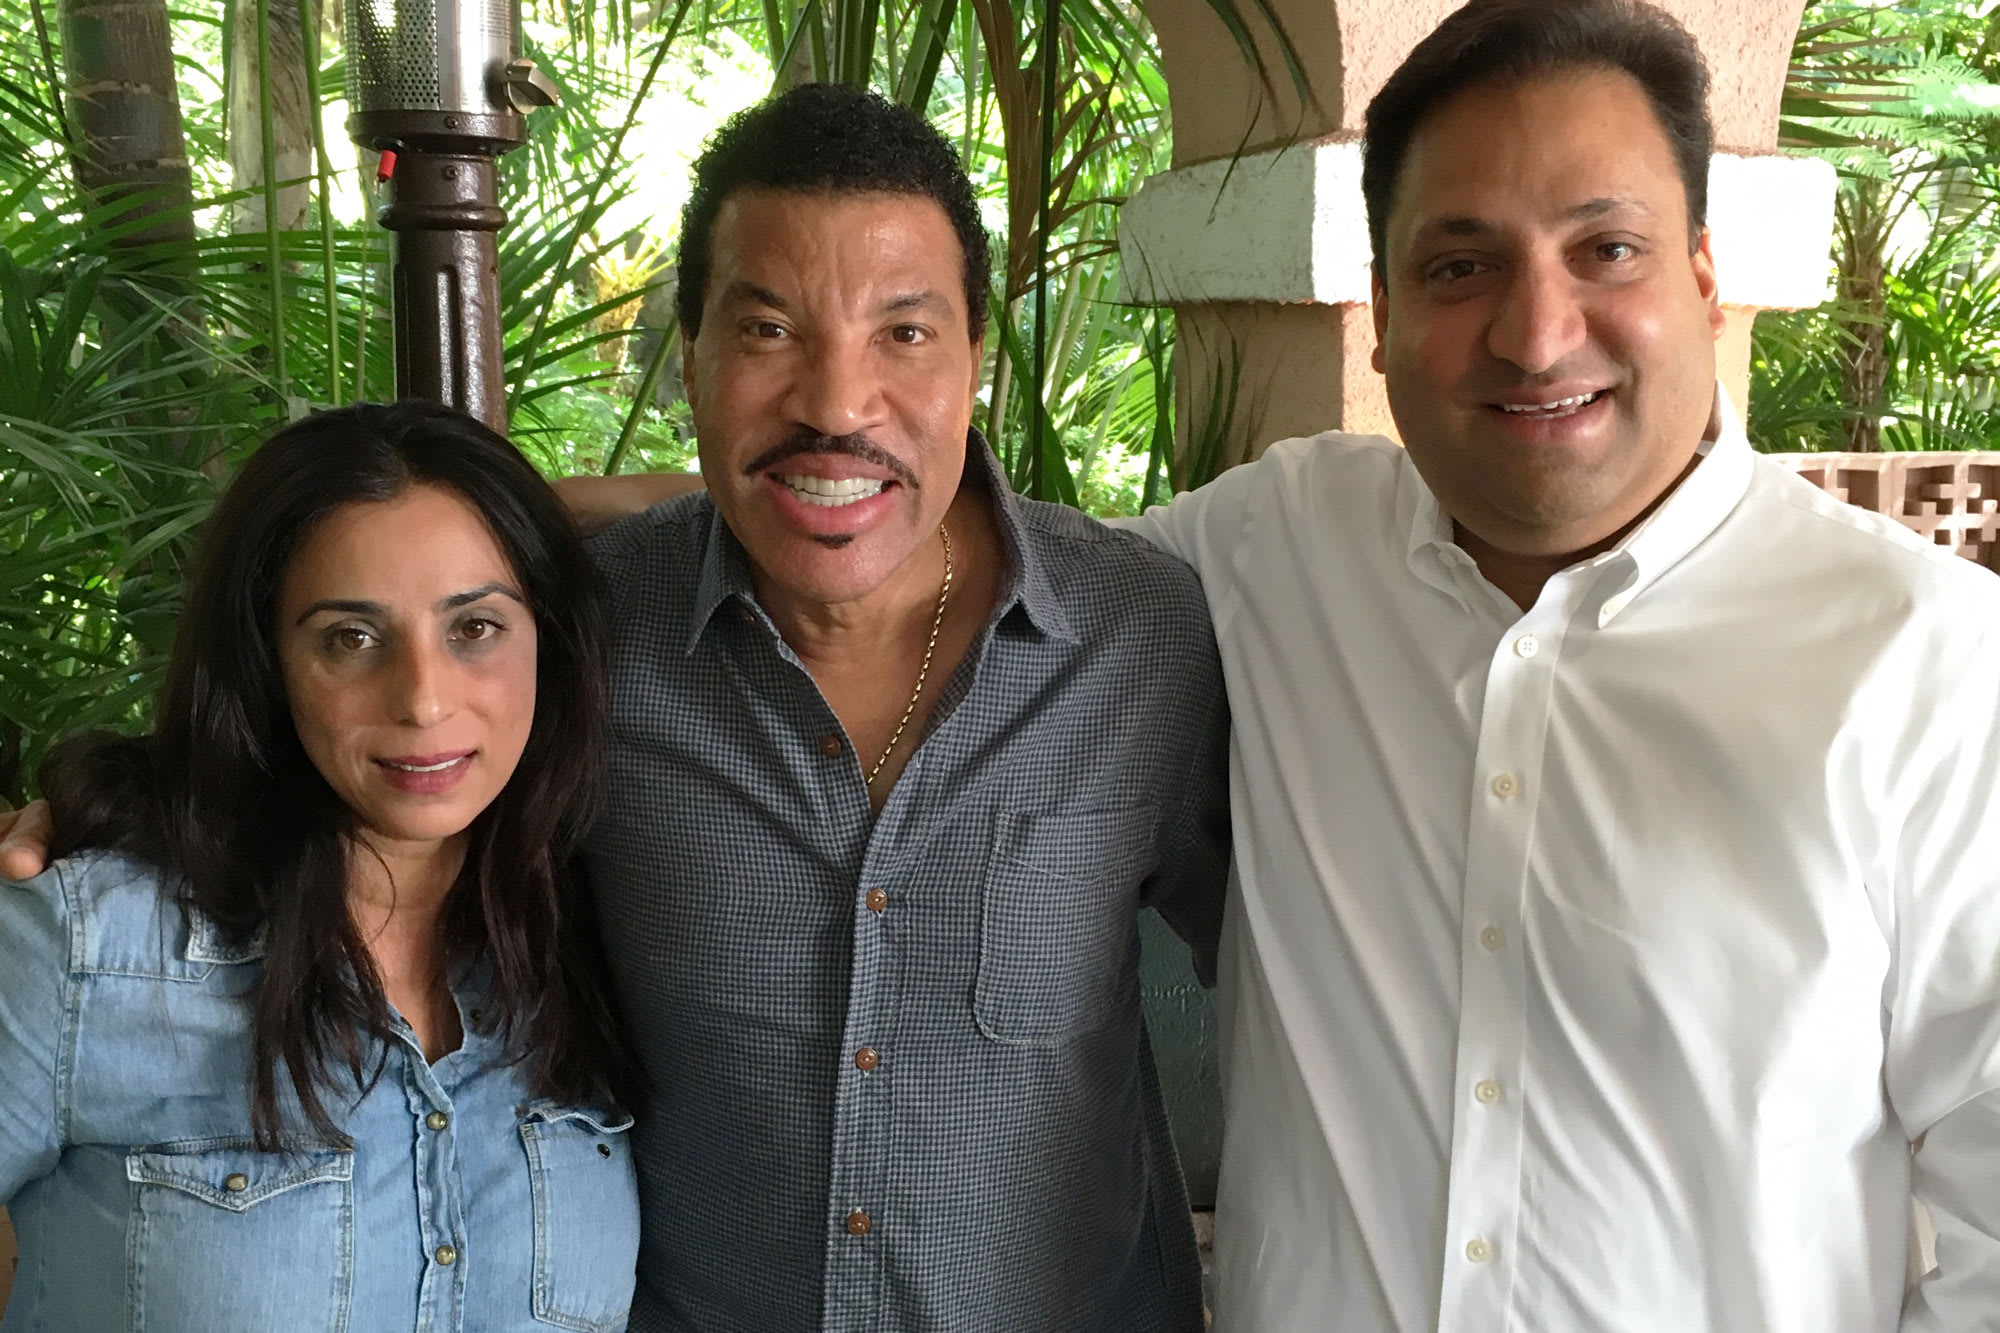 Begin-up backed by Lionel Richie addresses Covid-related well being disaster